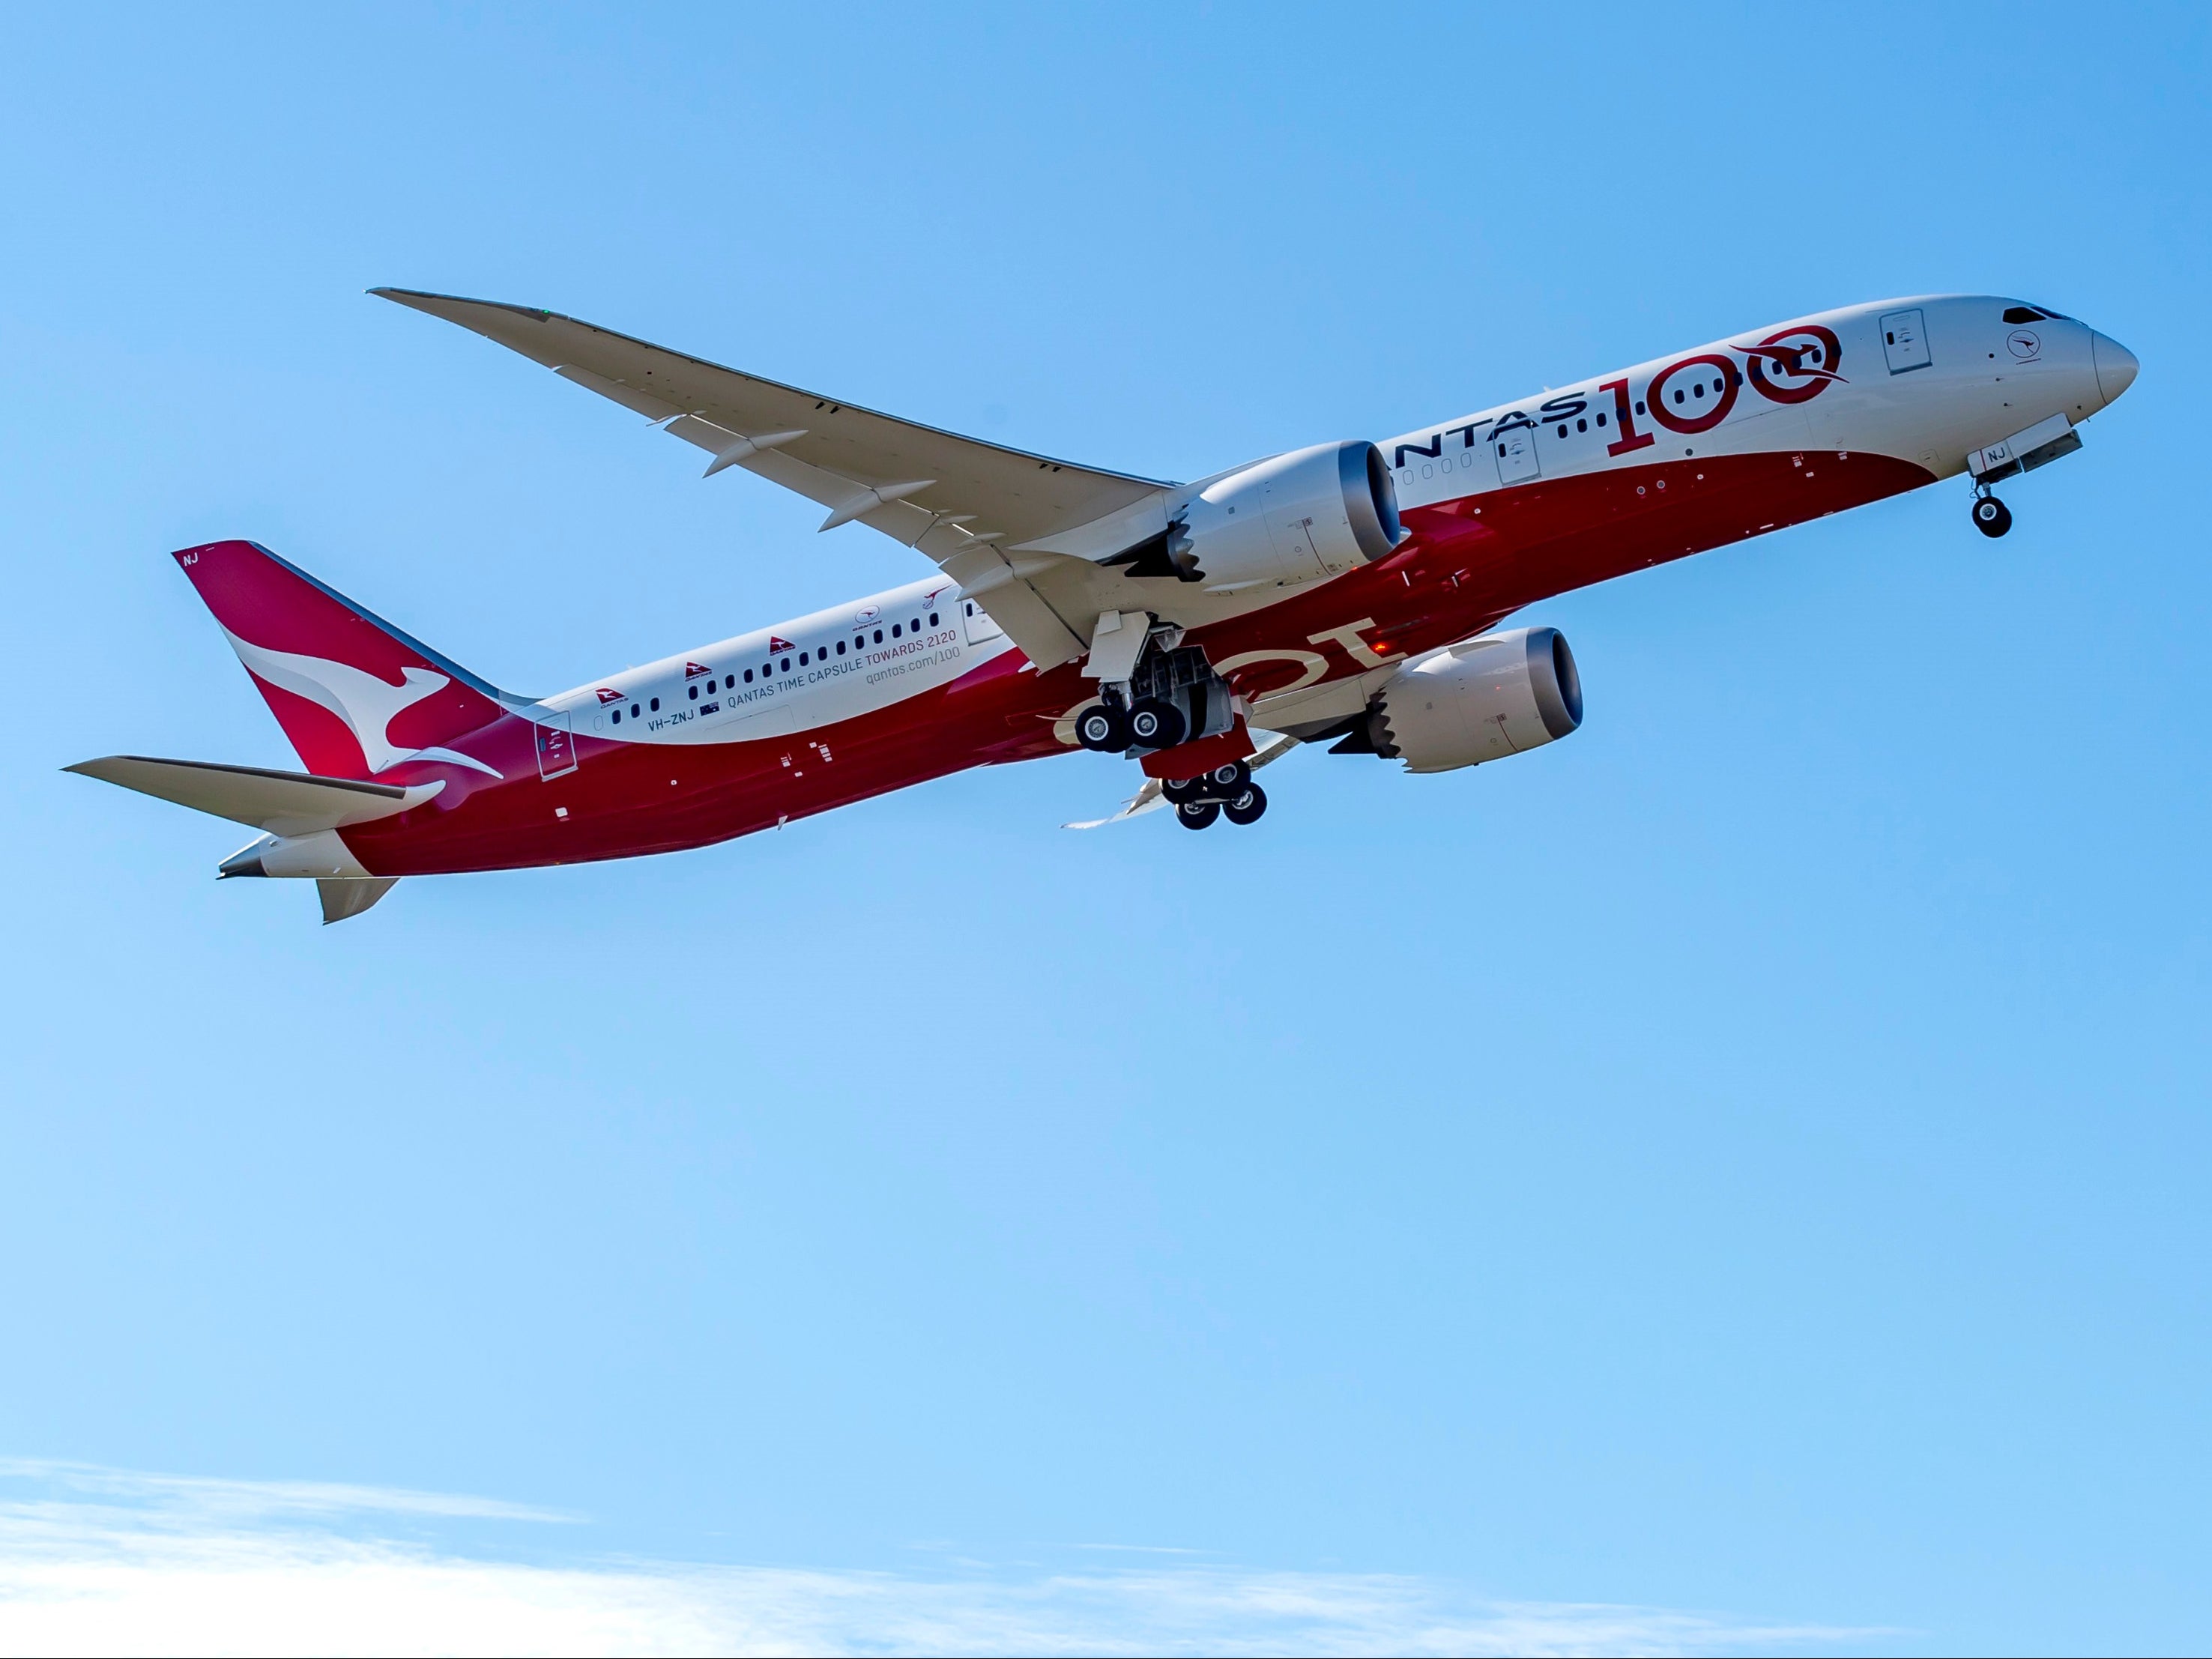 London bound: Qantas will operate all its UK flights with the Boeing 787